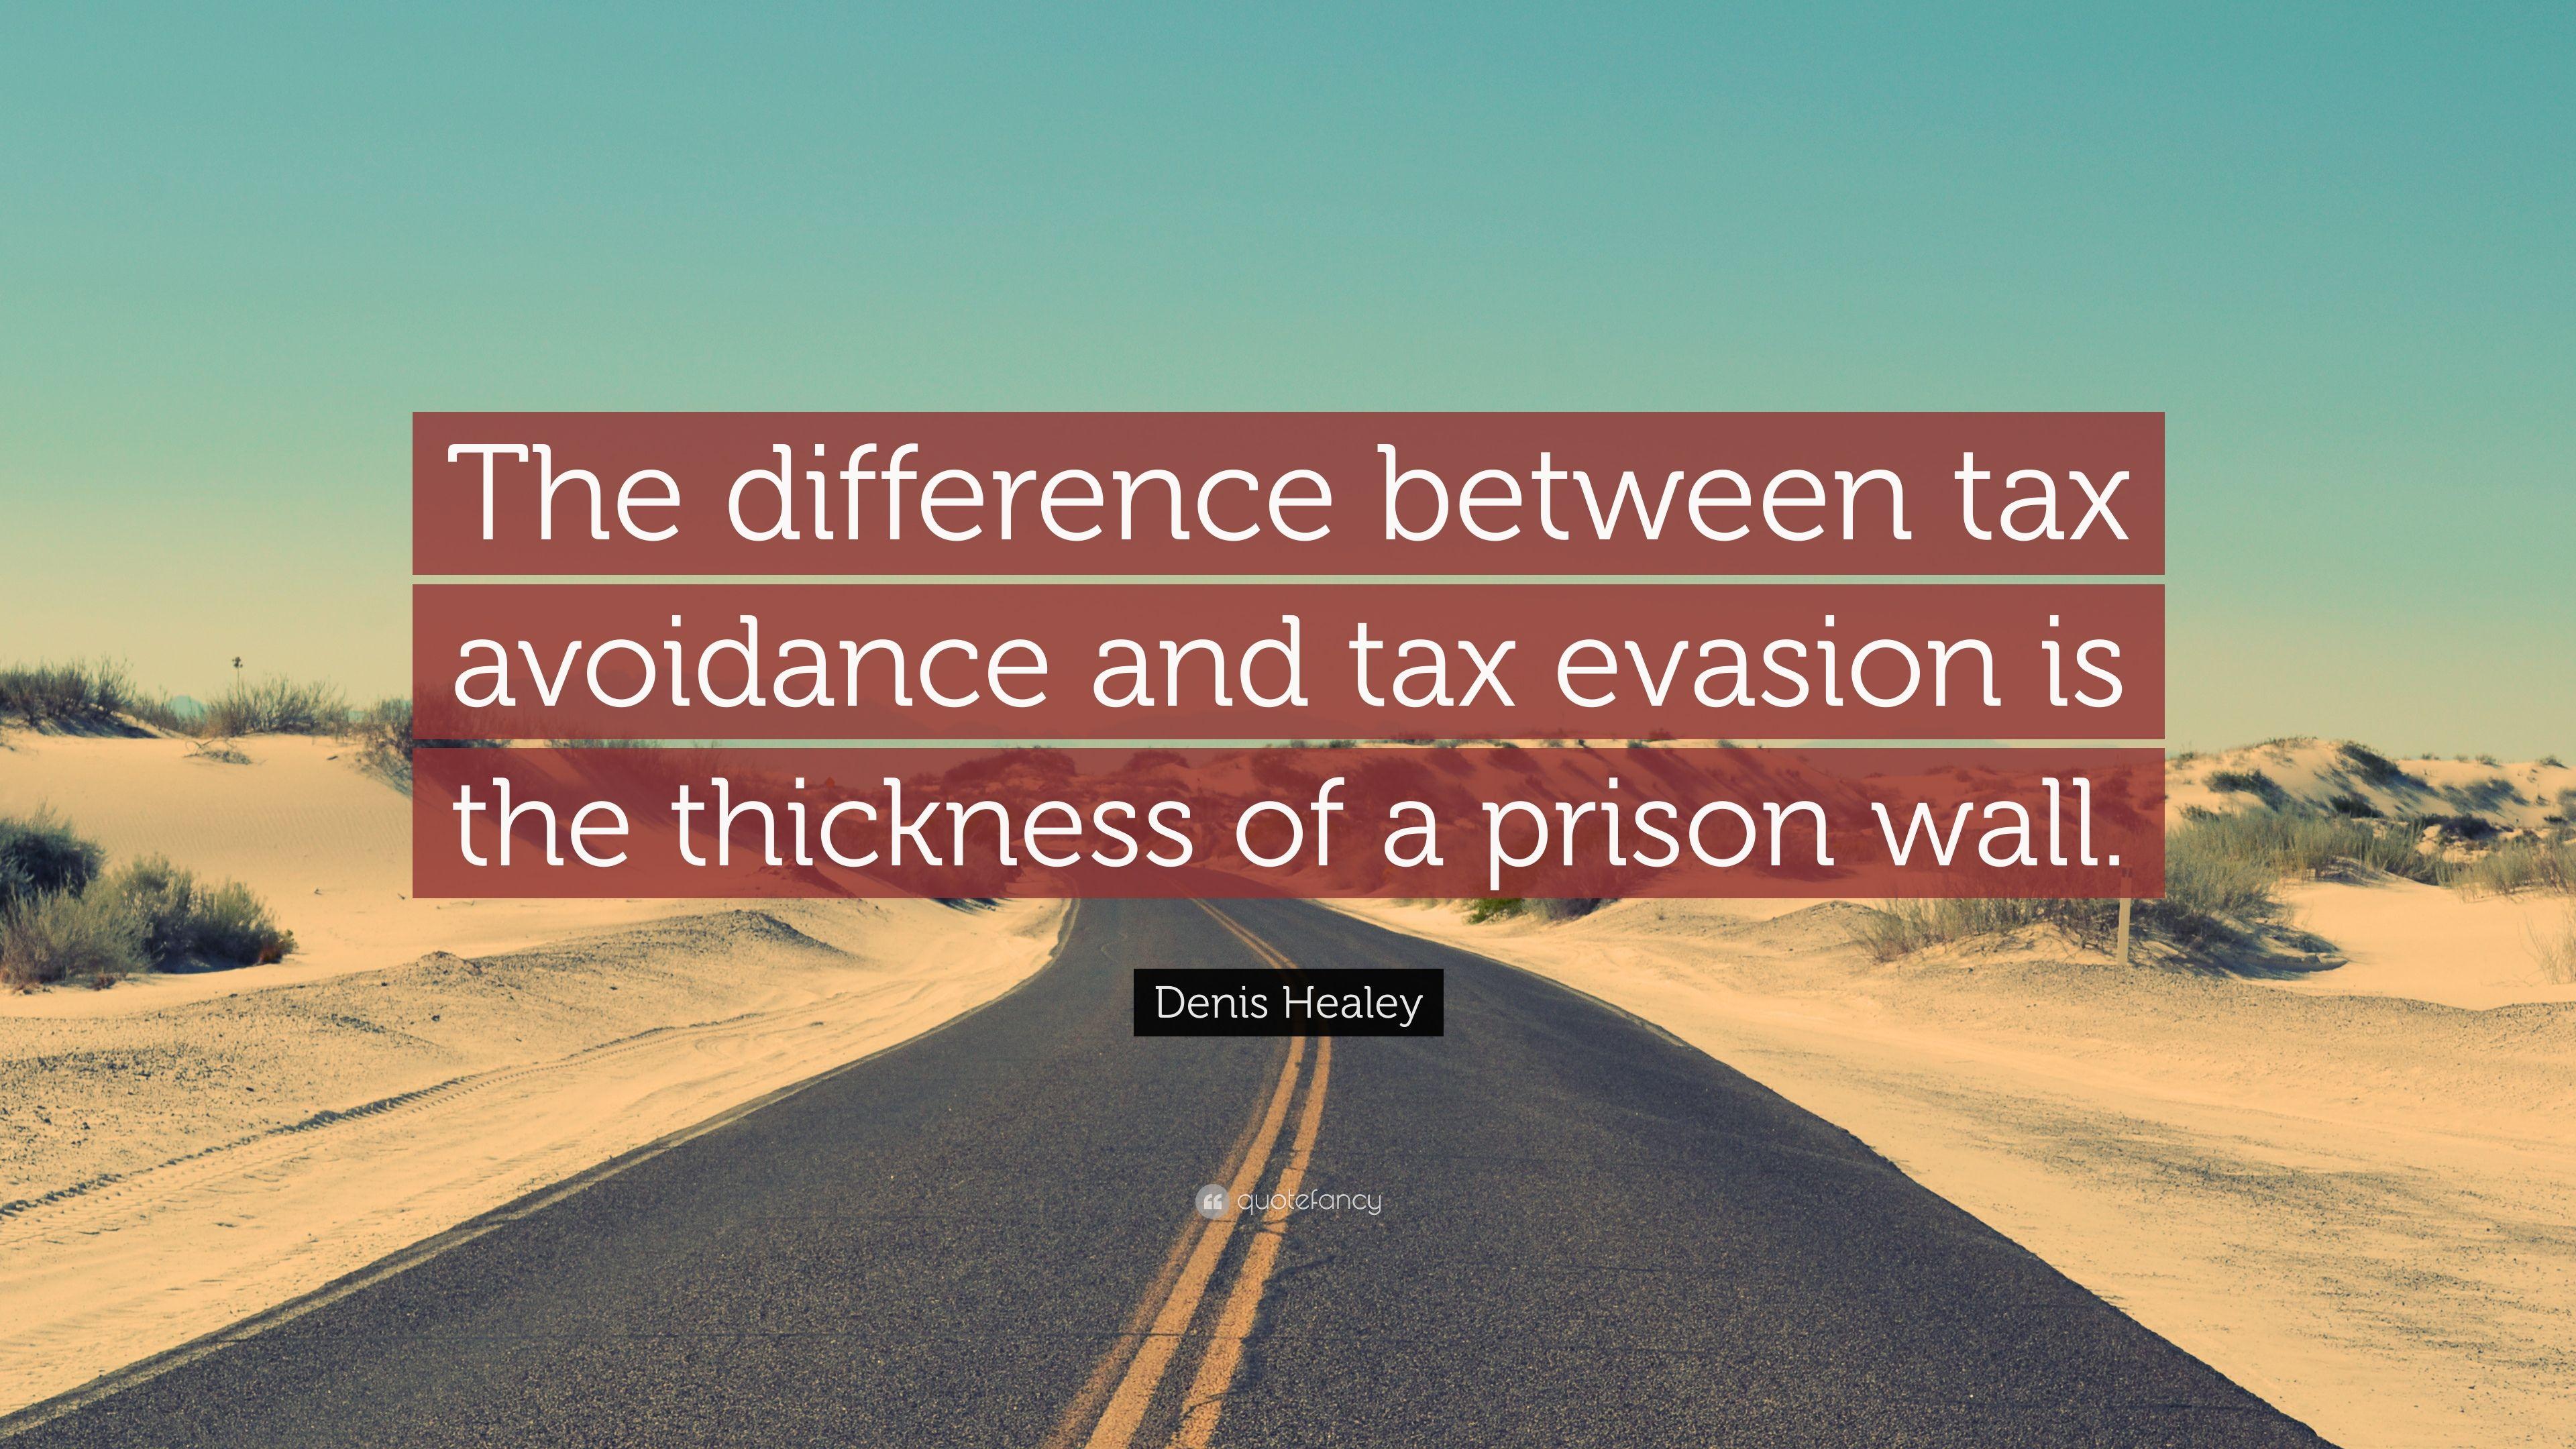 Denis Healey Quote: “The difference between tax avoidance and tax